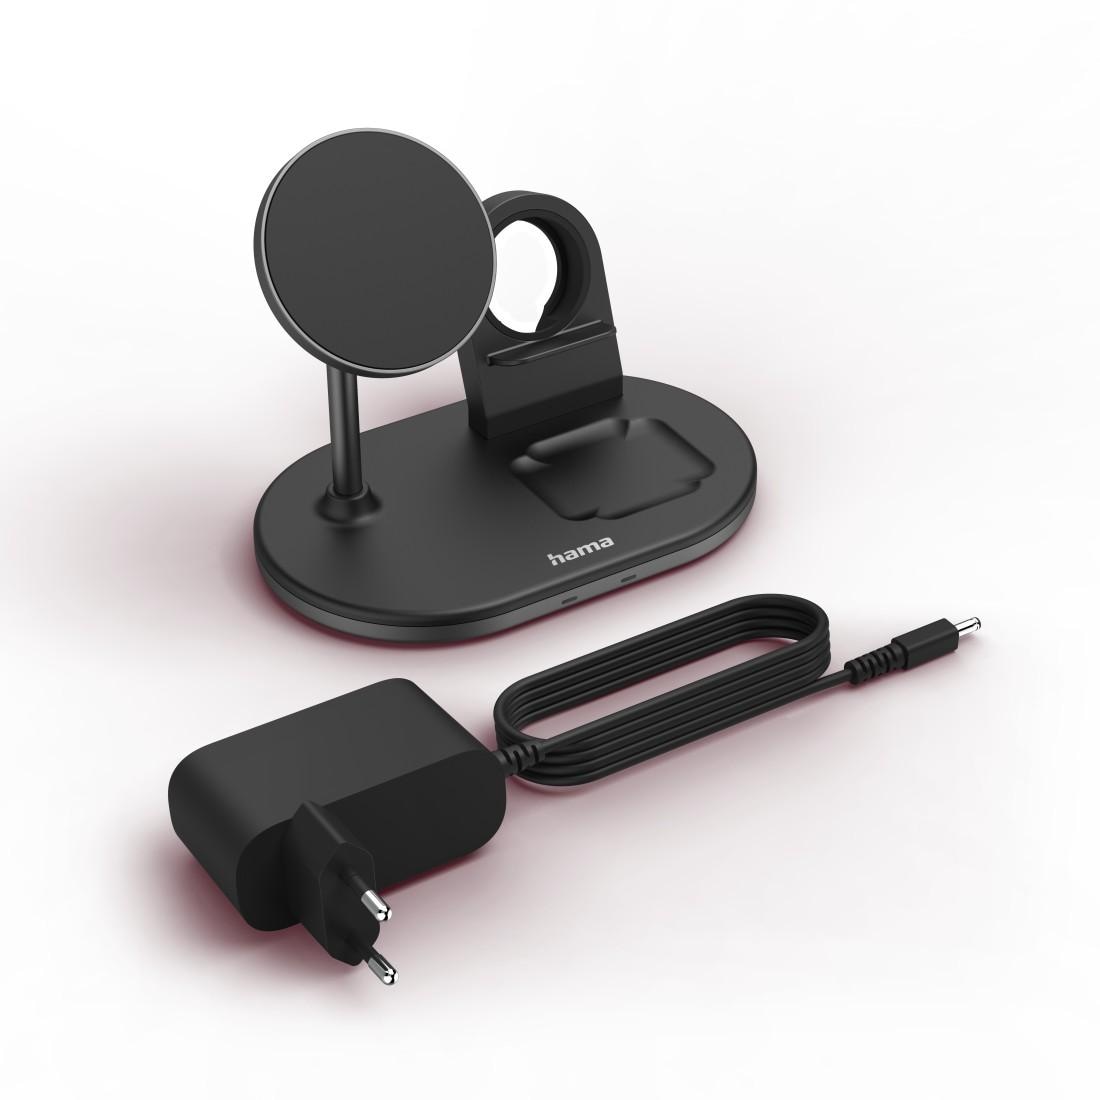 Hama Induktions-Ladegerät »3in1 Wireless Charger Ladestation für Apple iPhone AirPod Apple Watch«, mit Pad, Fast-Charge-Technologie, Apple iPhone 12, 13, 14, 15-Modelle